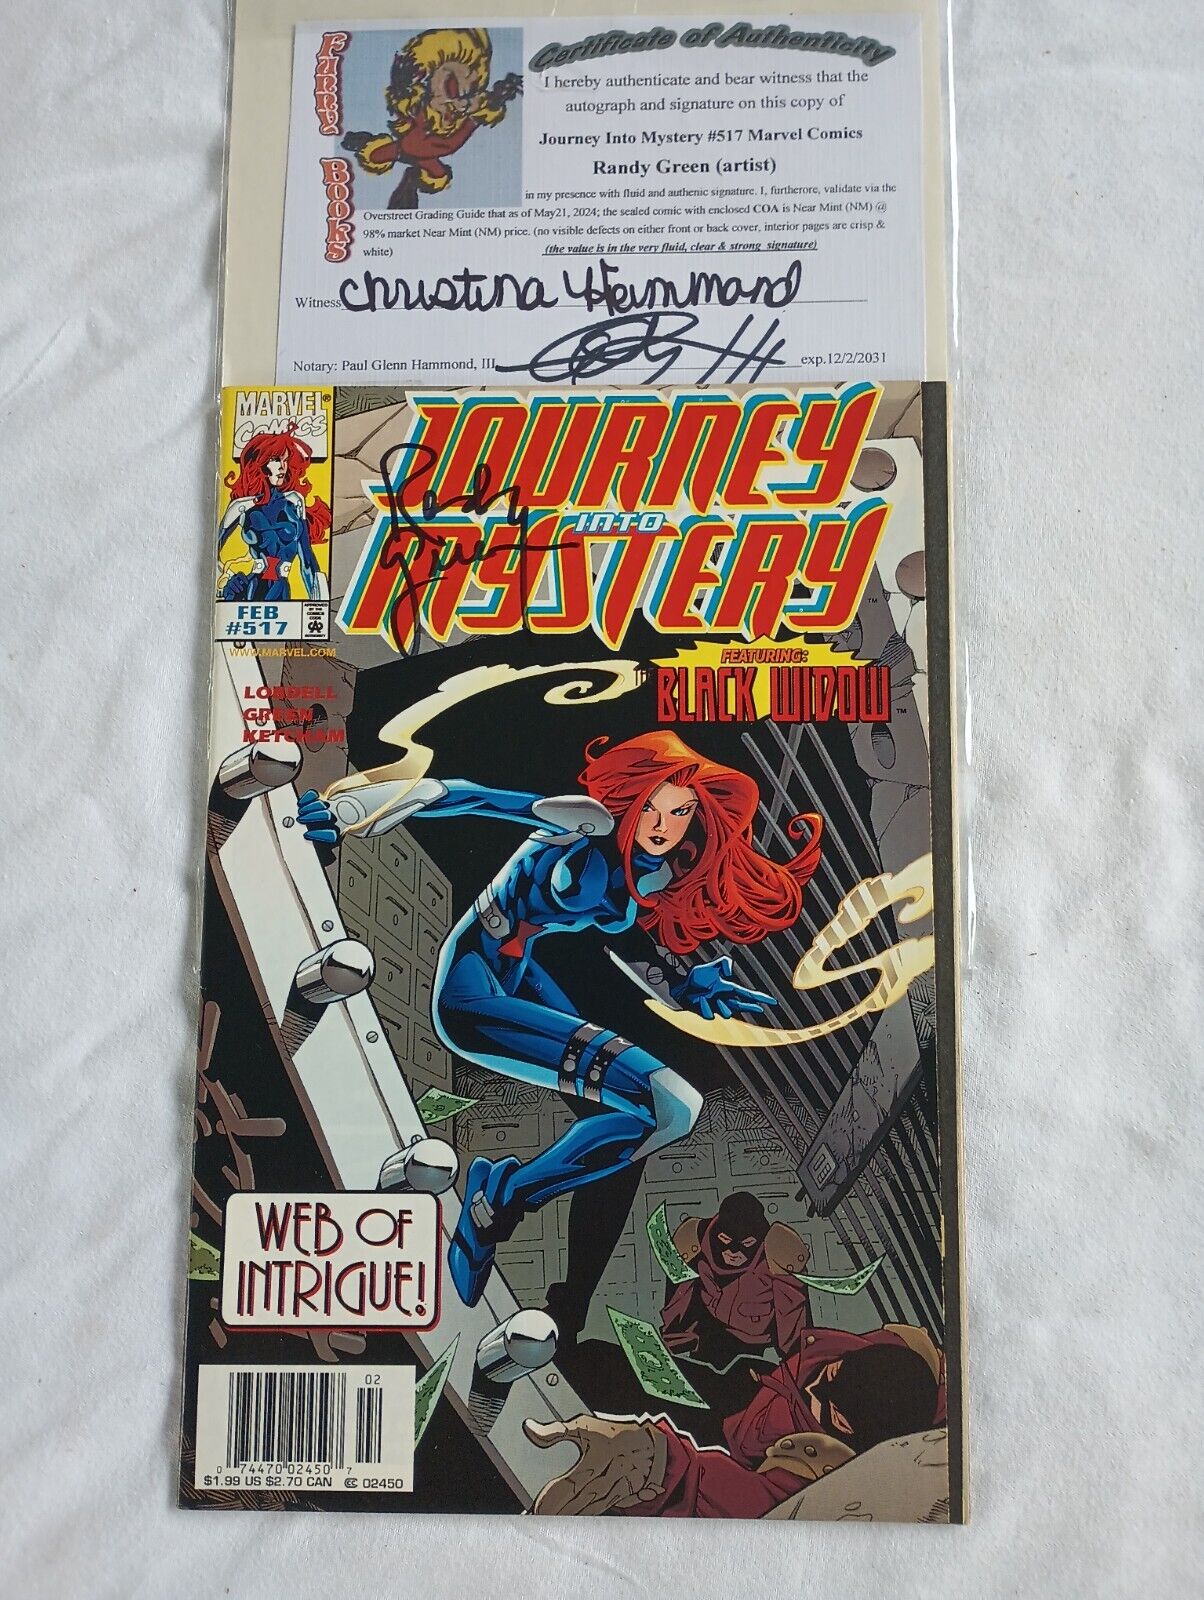 JOURNEY INTO MYSTERY#517 (NM) 1998 MARVEL COMIC (Black Widow) signed Randy Green